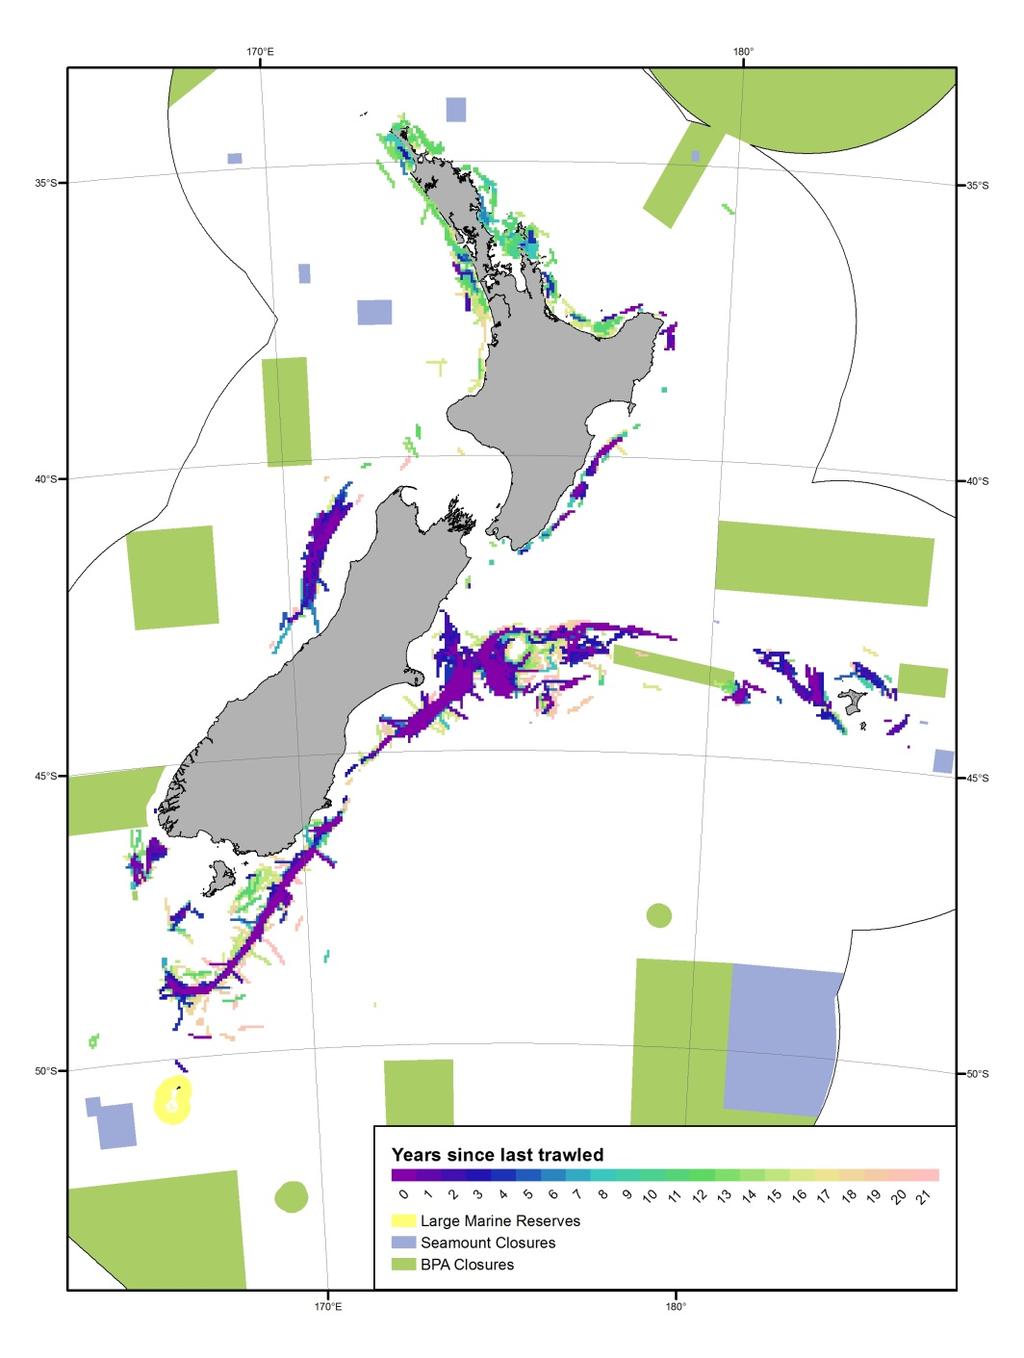 for more than ten years (Figure 31). Small areas around the Chatham Rise and to the east of Stewart Island have remained unswept for even longer periods.